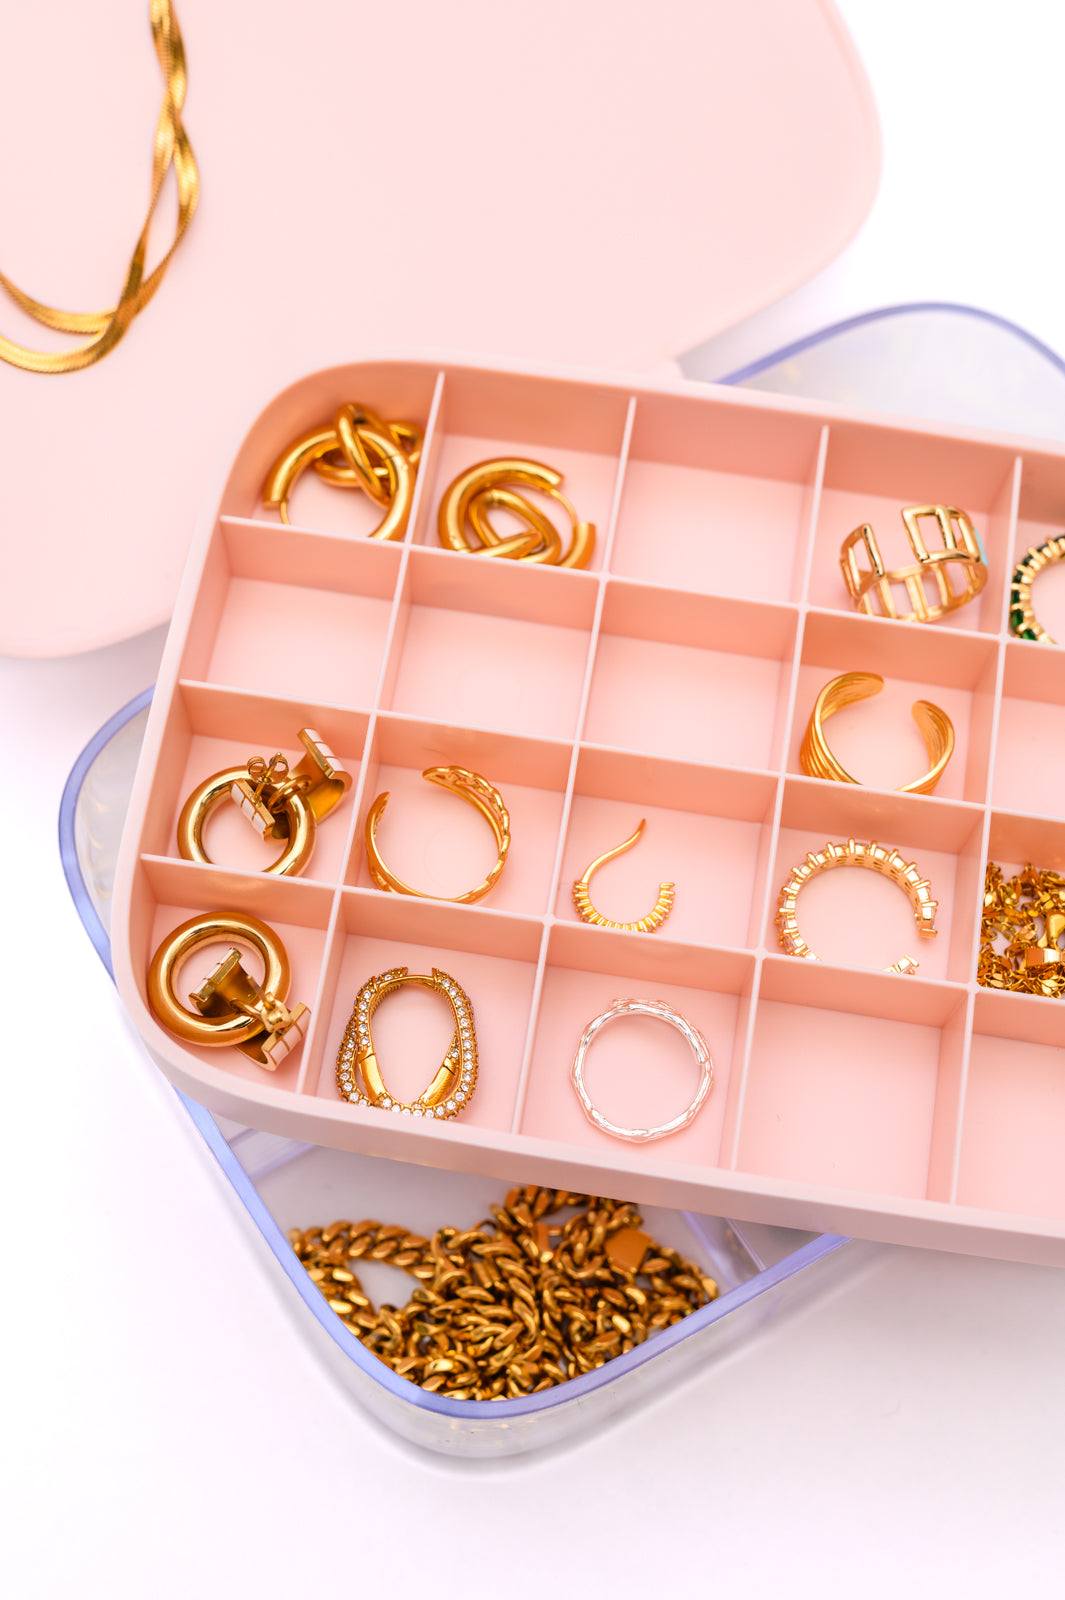 A close-up image of The Dapper Squirrel's All Sorted Out Jewelry Storage Case in Pink showcases an elegant organizational solution. The box features multiple compartments, each holding different types of gold jewelry, including earrings, rings, and chains in various designs. The removable storage tray sits neatly inside the slightly open lid.